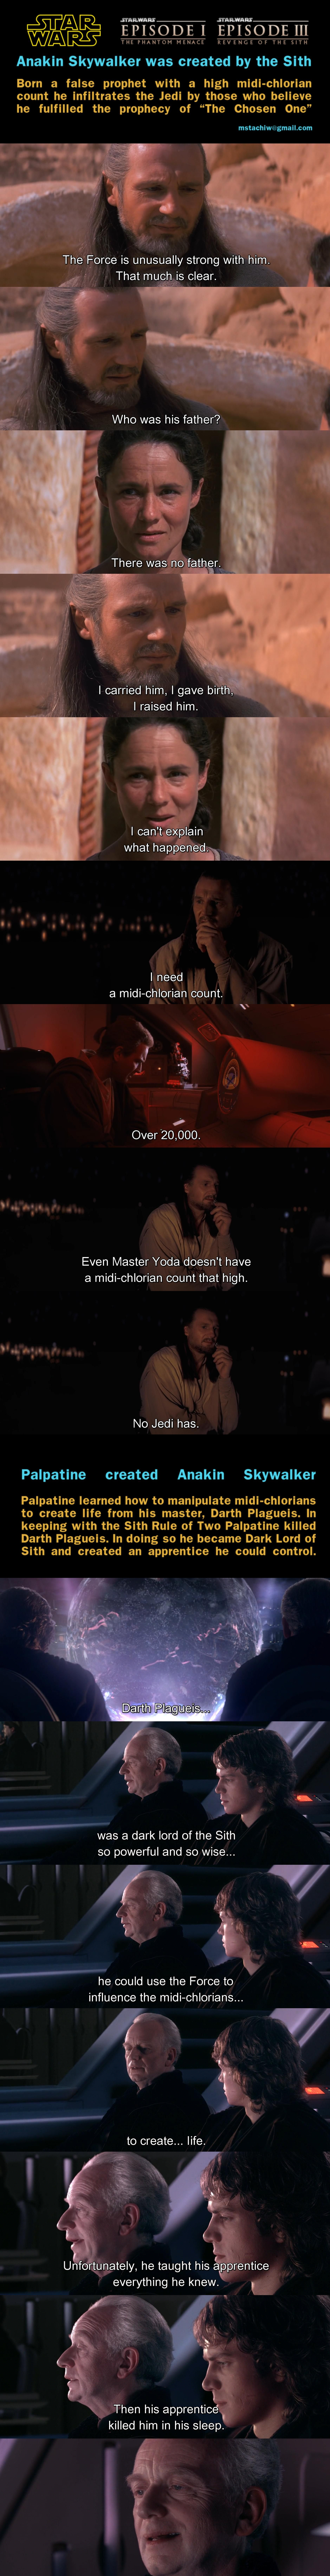 If the prequels were made with this theory in mind, we would have this epic reveal moment, that could rival the one at the end of